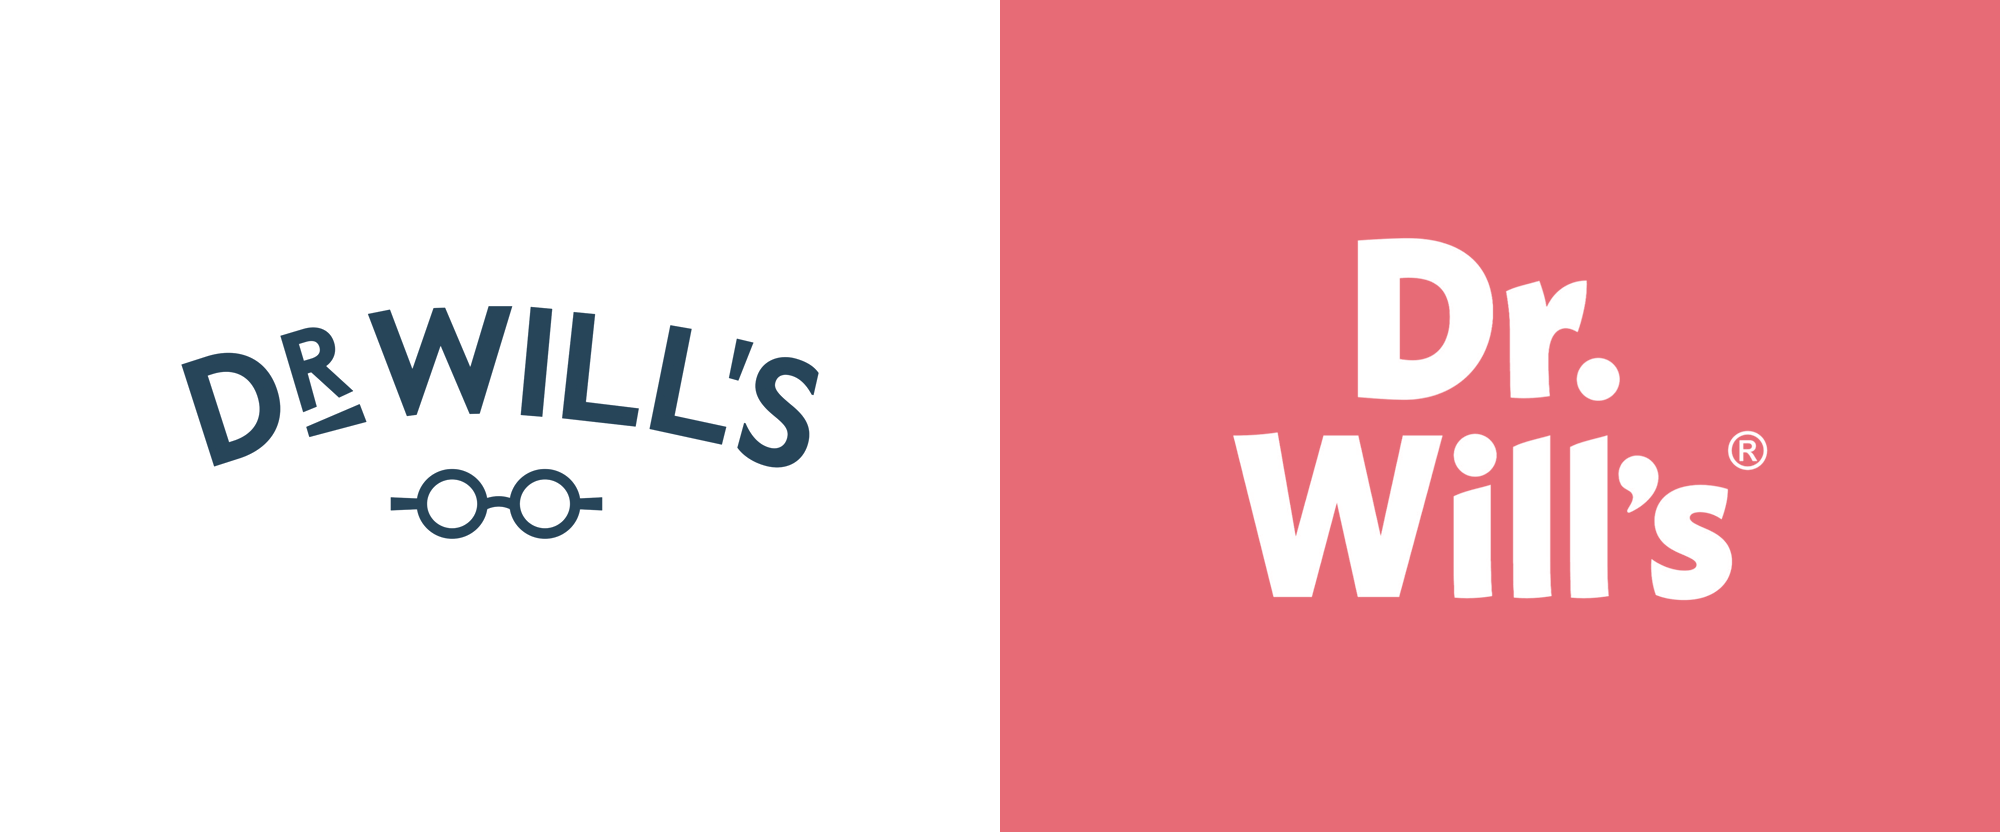 New Logo and Packaging for Dr Will’s by B&B Studio